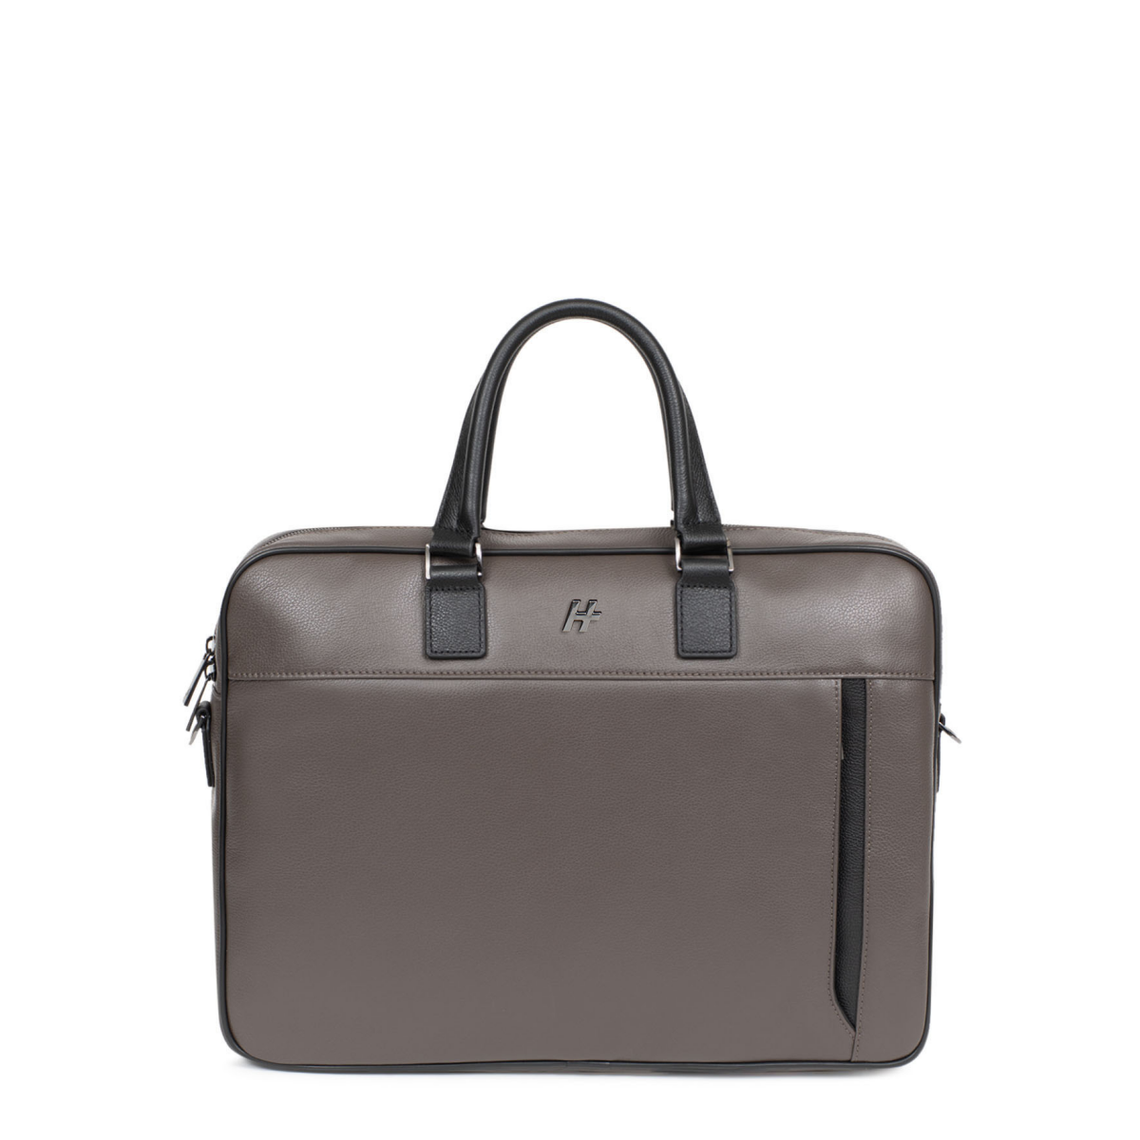 Porte-documents 13 & A4 Cuir TOGETHER Taupe/Noir Theo